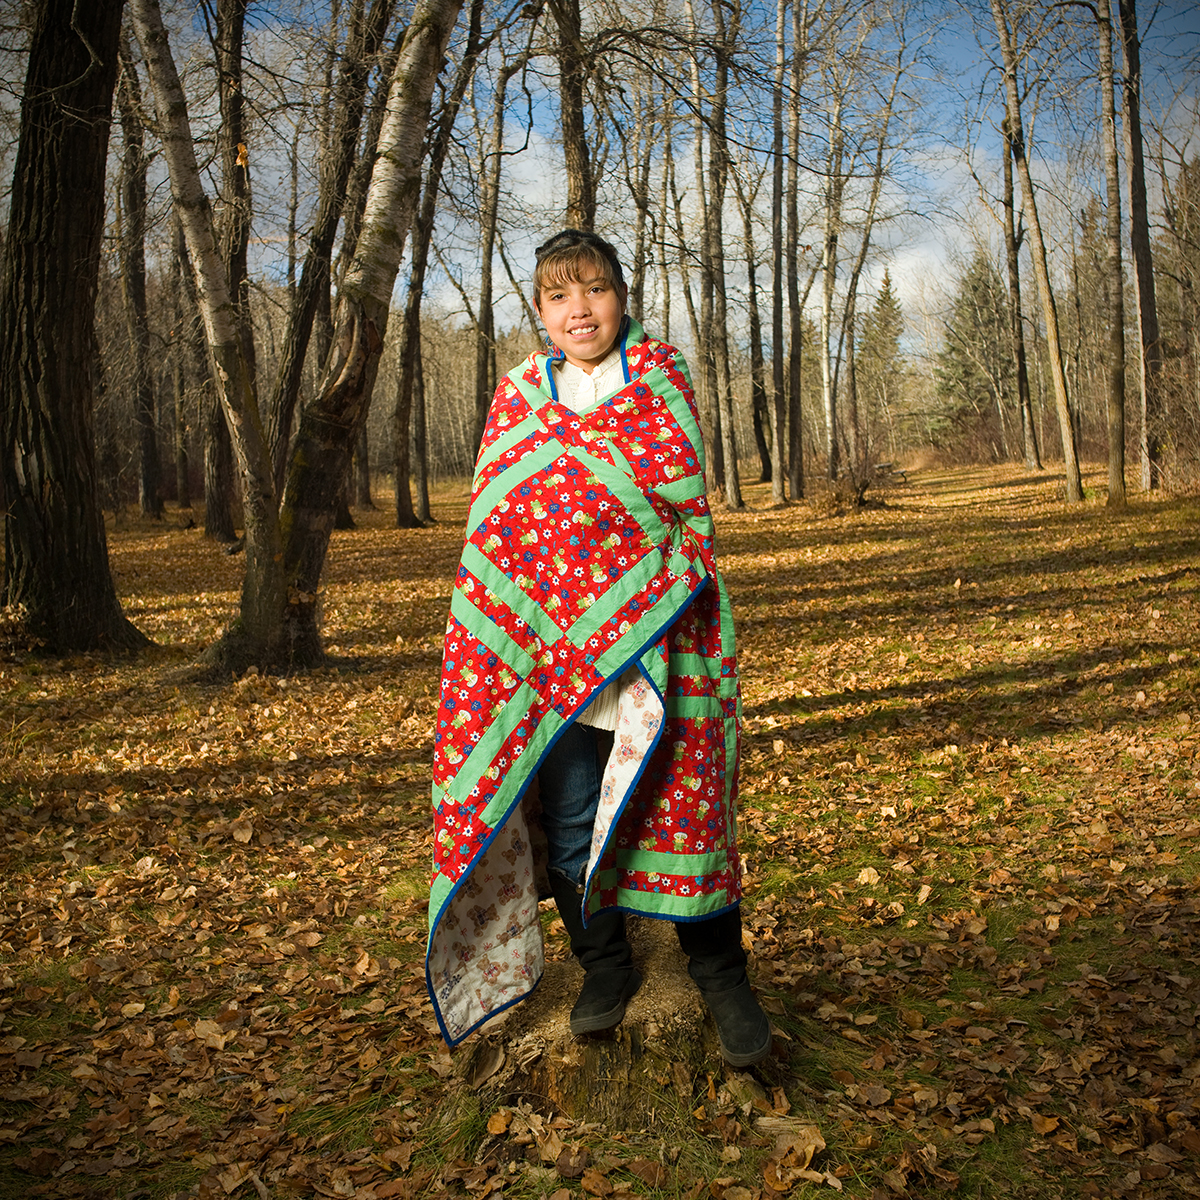 Keisha standing in amongst a field with trees, wrapped in a blanket in 2007